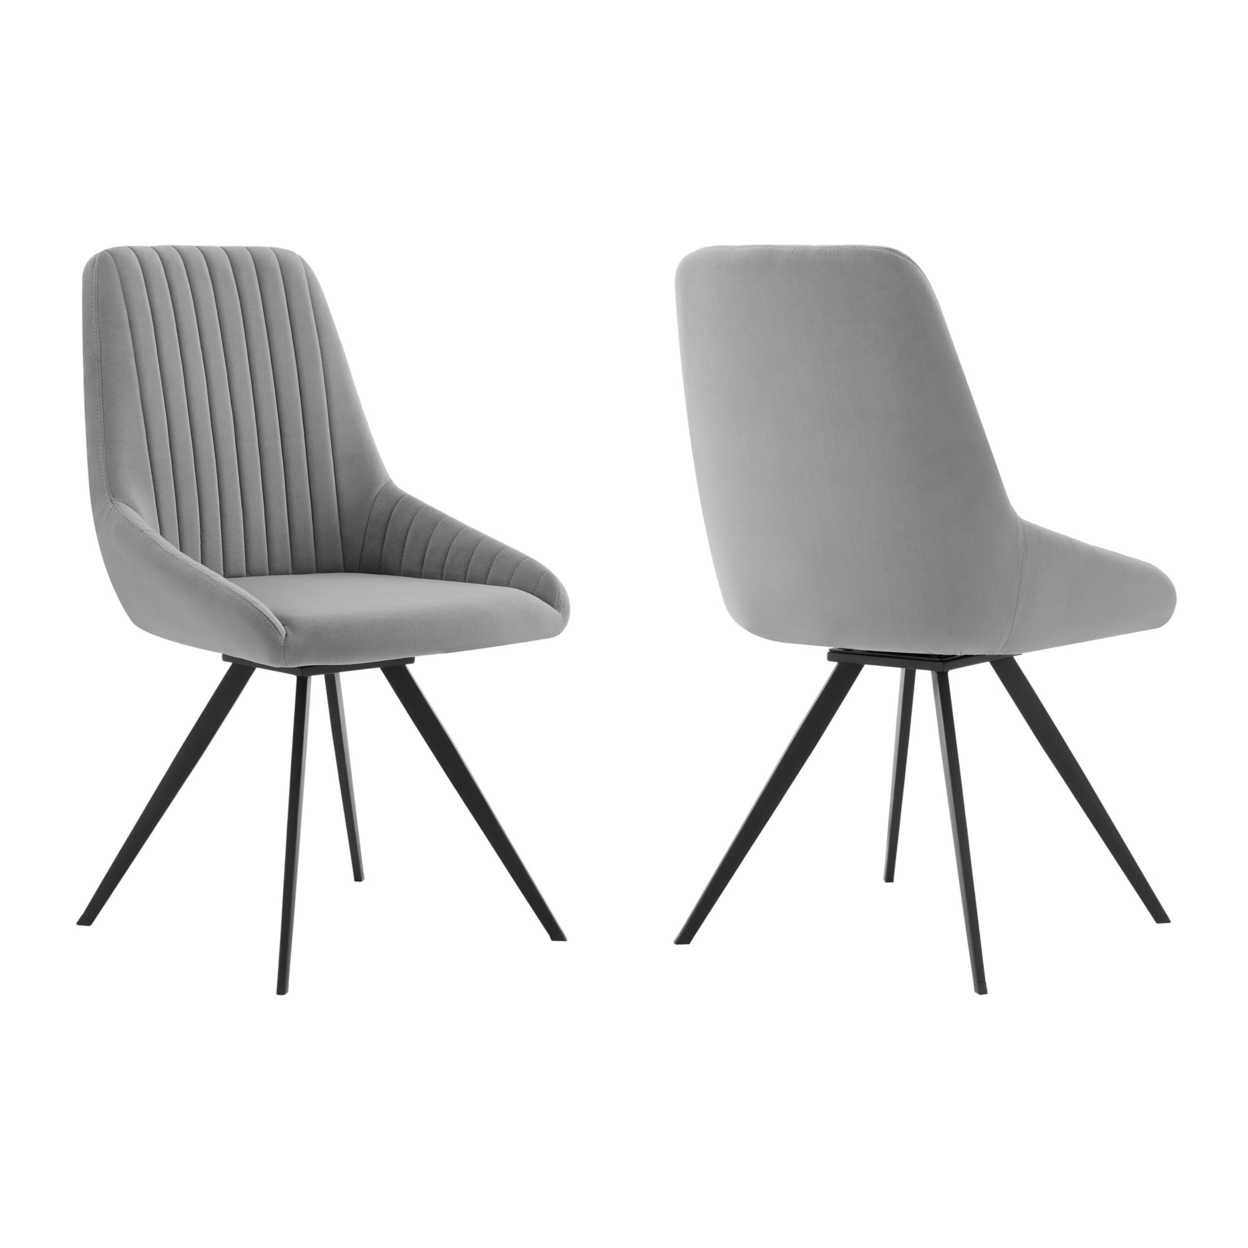 Vertical Tufted Fabric Dining Chair With Angled Metal Legs, Set Of 2, Gray- Saltoro Sherpi